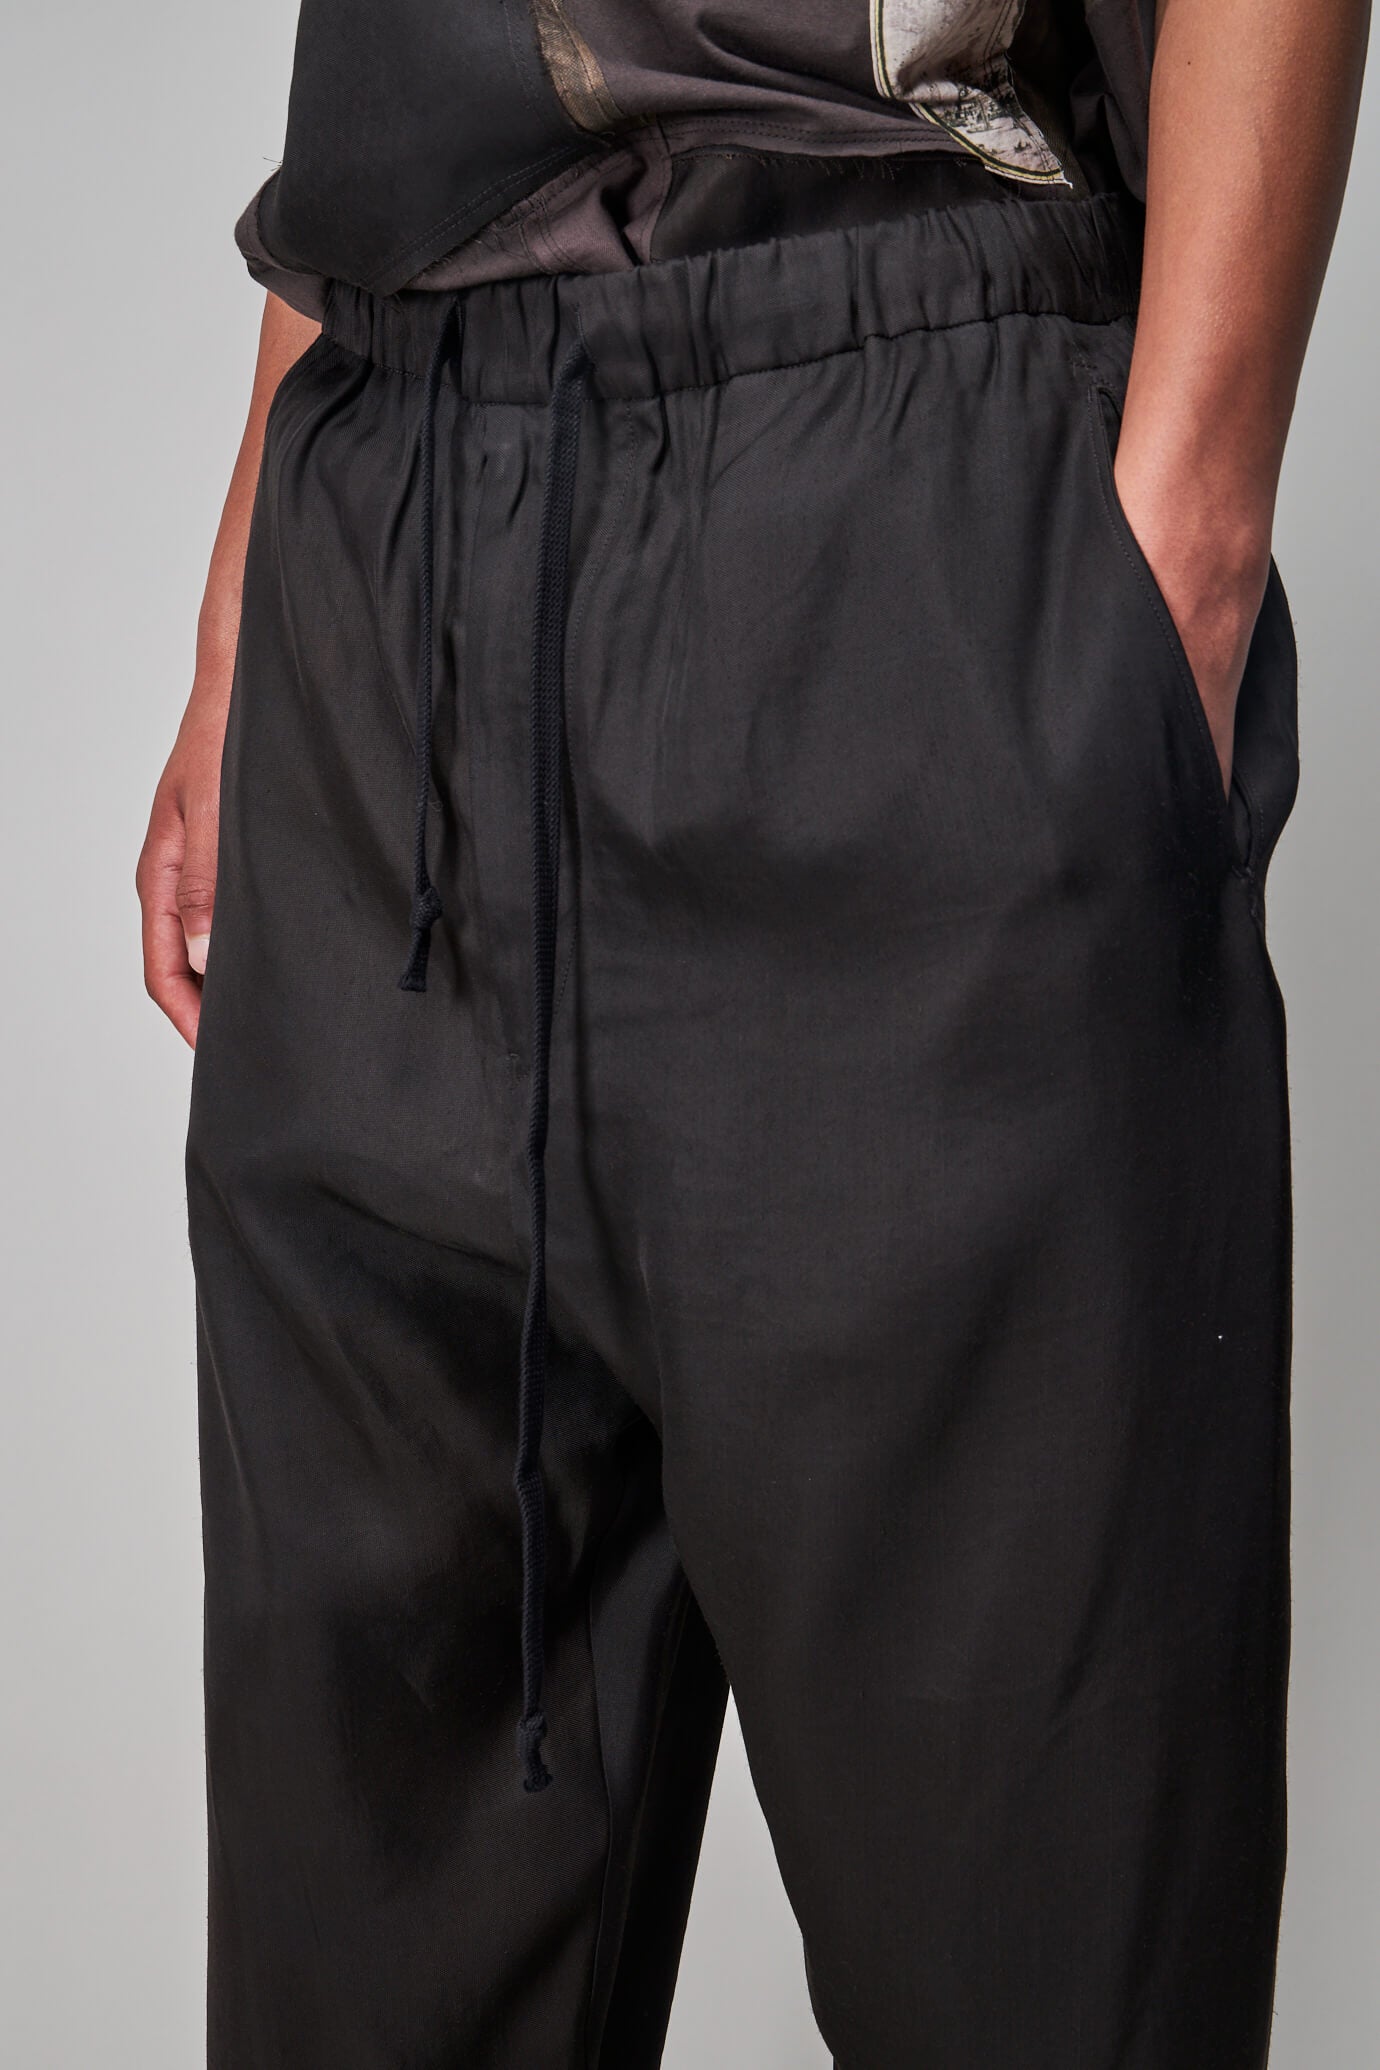 Tapered Tailor Drawstring Trousers, black